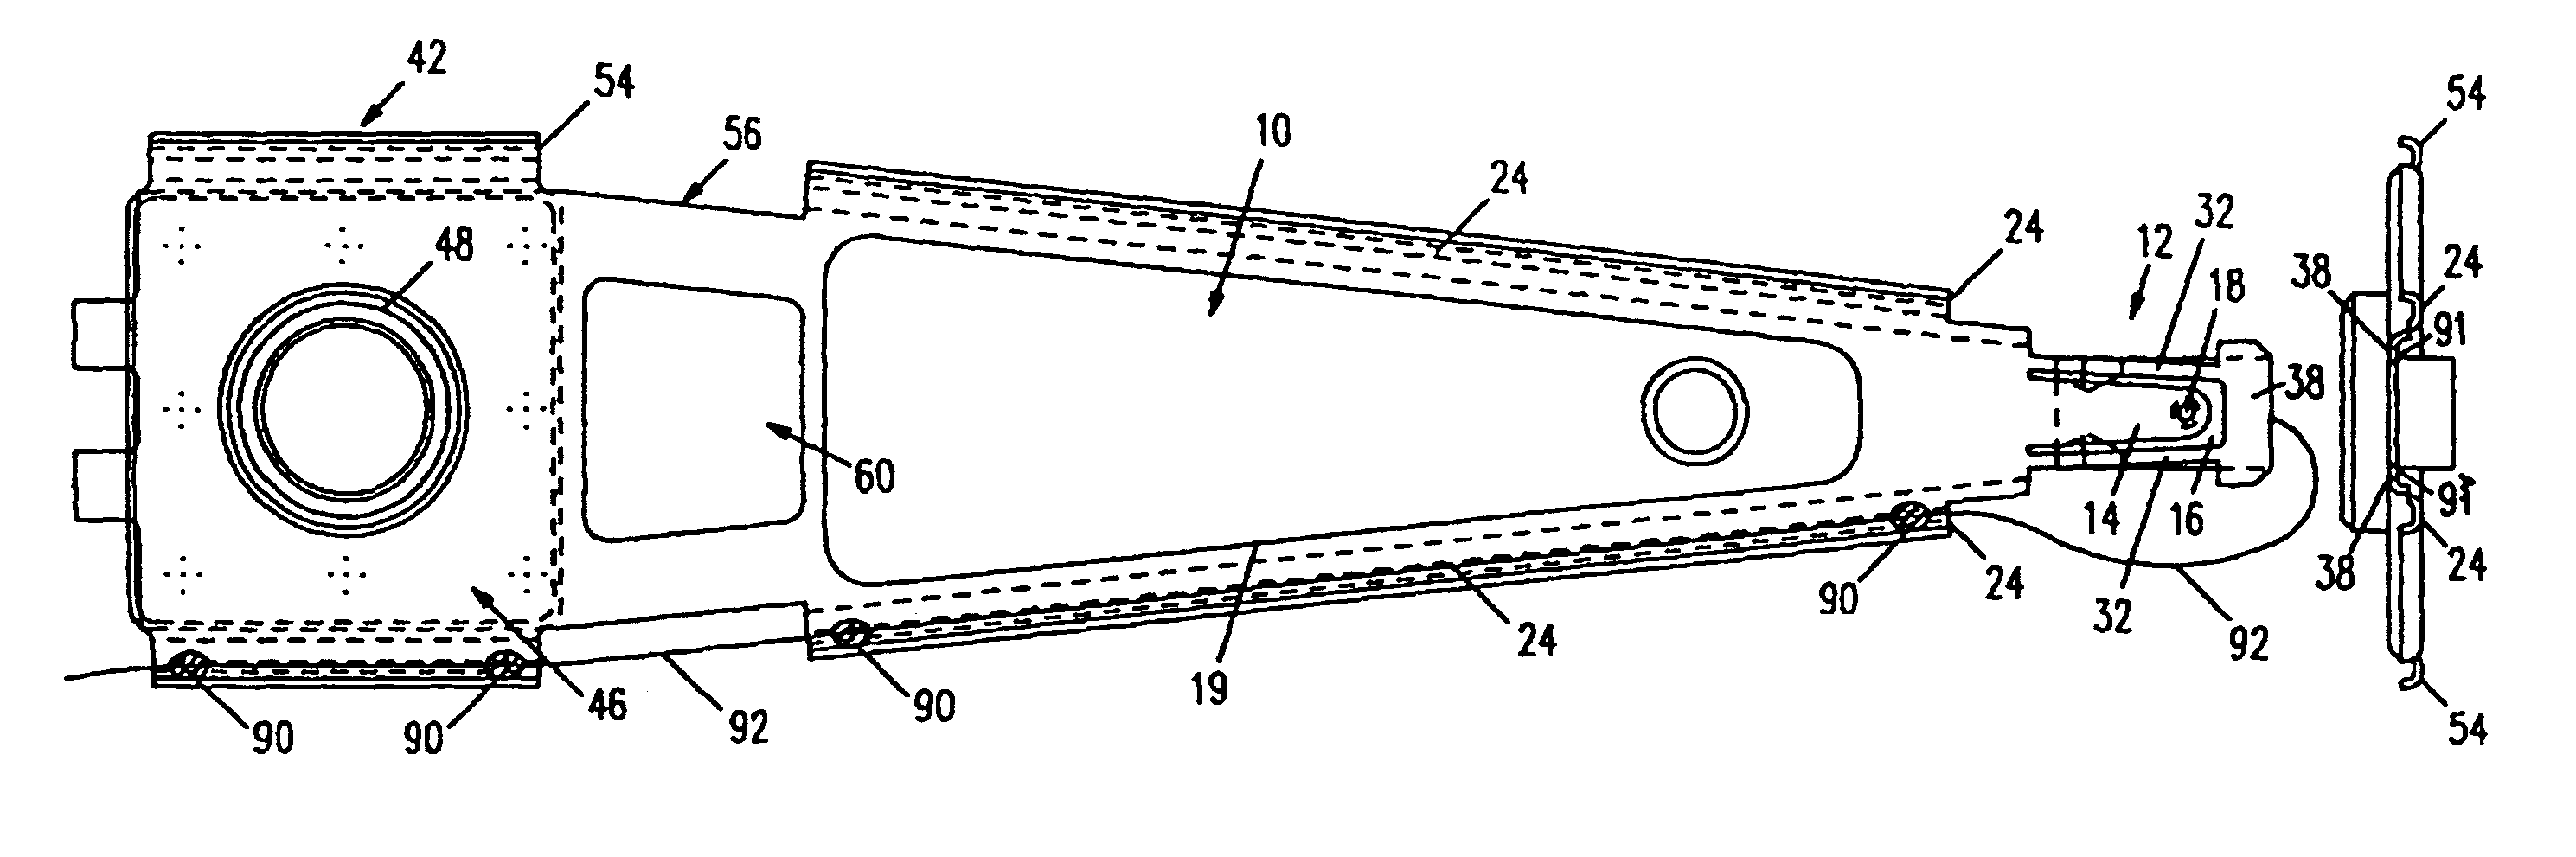 Magnetic head suspension assembly fabricated with integral load beam and flexure